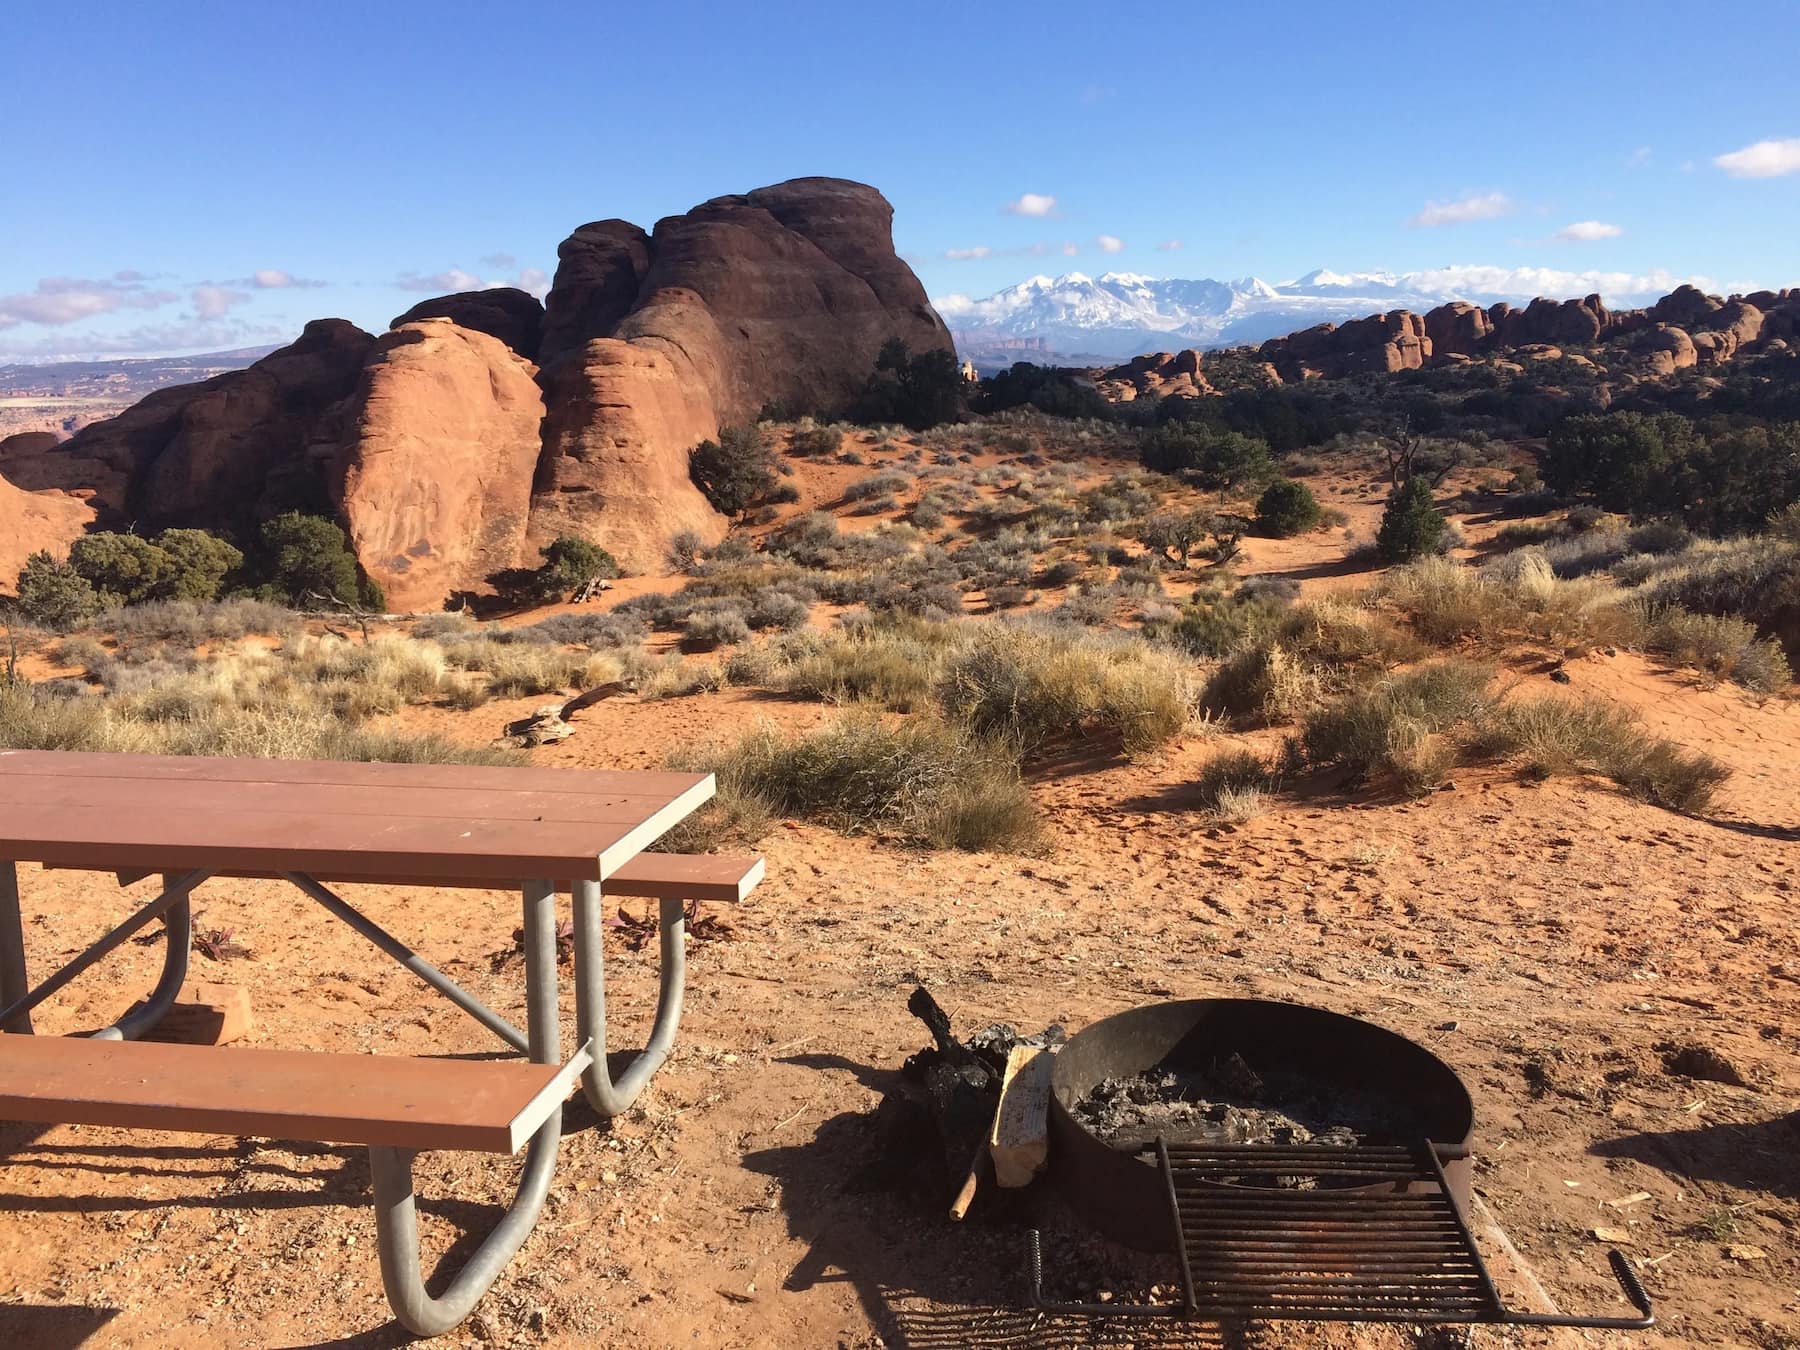 Campsite with picnic table and fire ring in red rocky desert with snow capped mountain landscape in the distance.